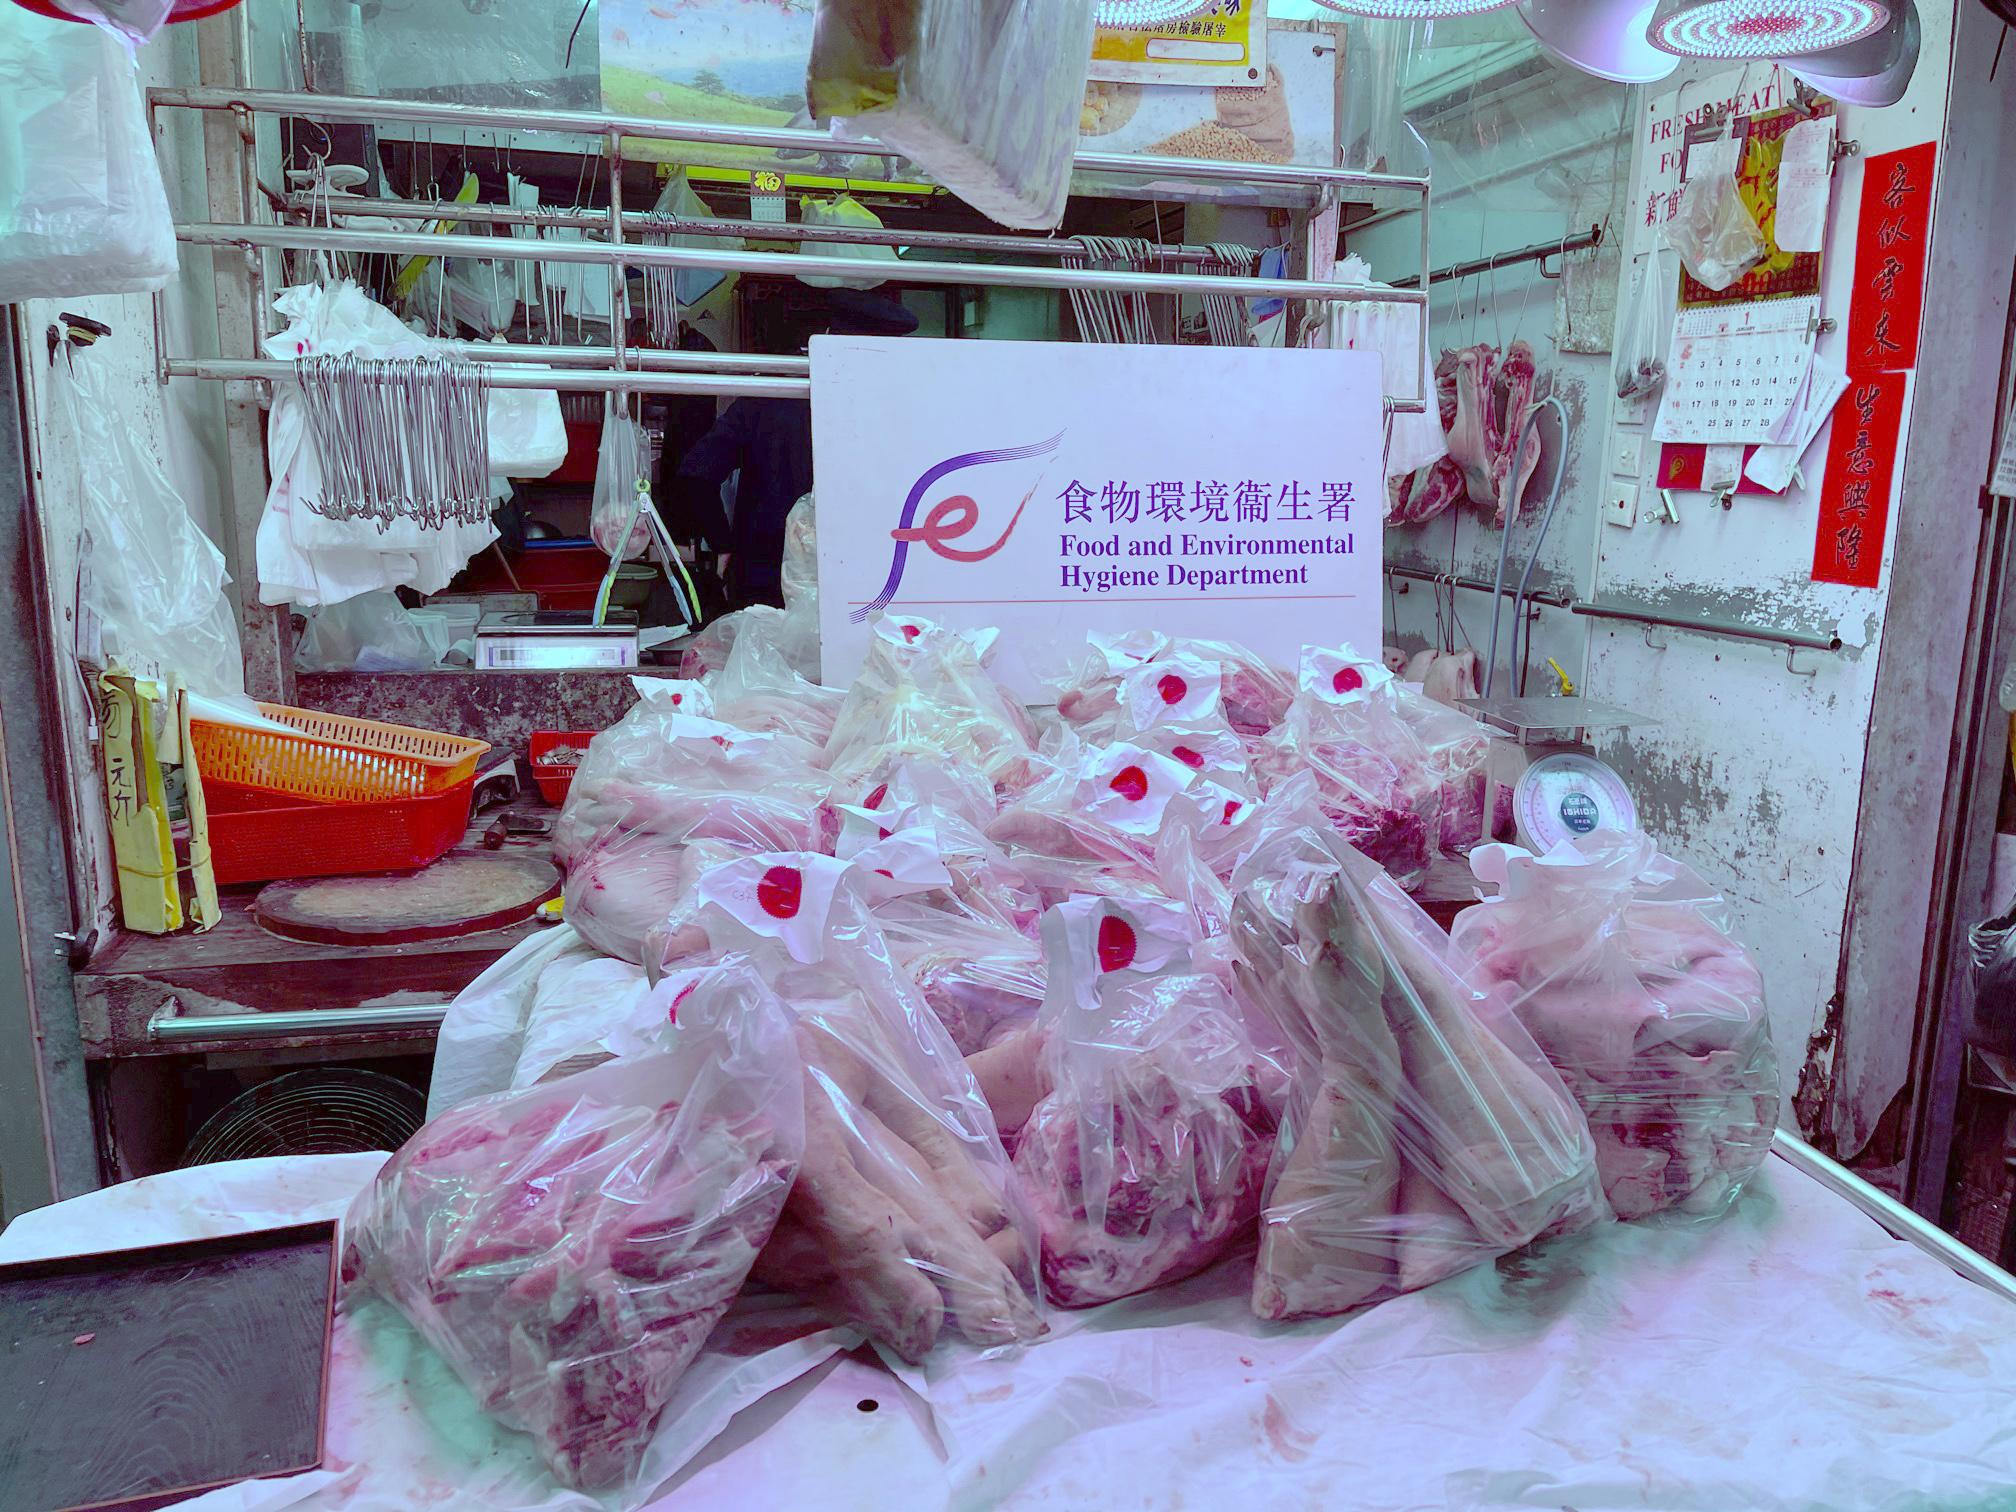 The Food and Environmental Hygiene Department (FEHD) raided a licensed fresh provision shop in Po Heung Street, Tai Po, suspected of selling chilled meat or frozen meat as fresh meat in a blitz operation today (January 28). Photo shows the meat seized by the FEHD officers during the operation.